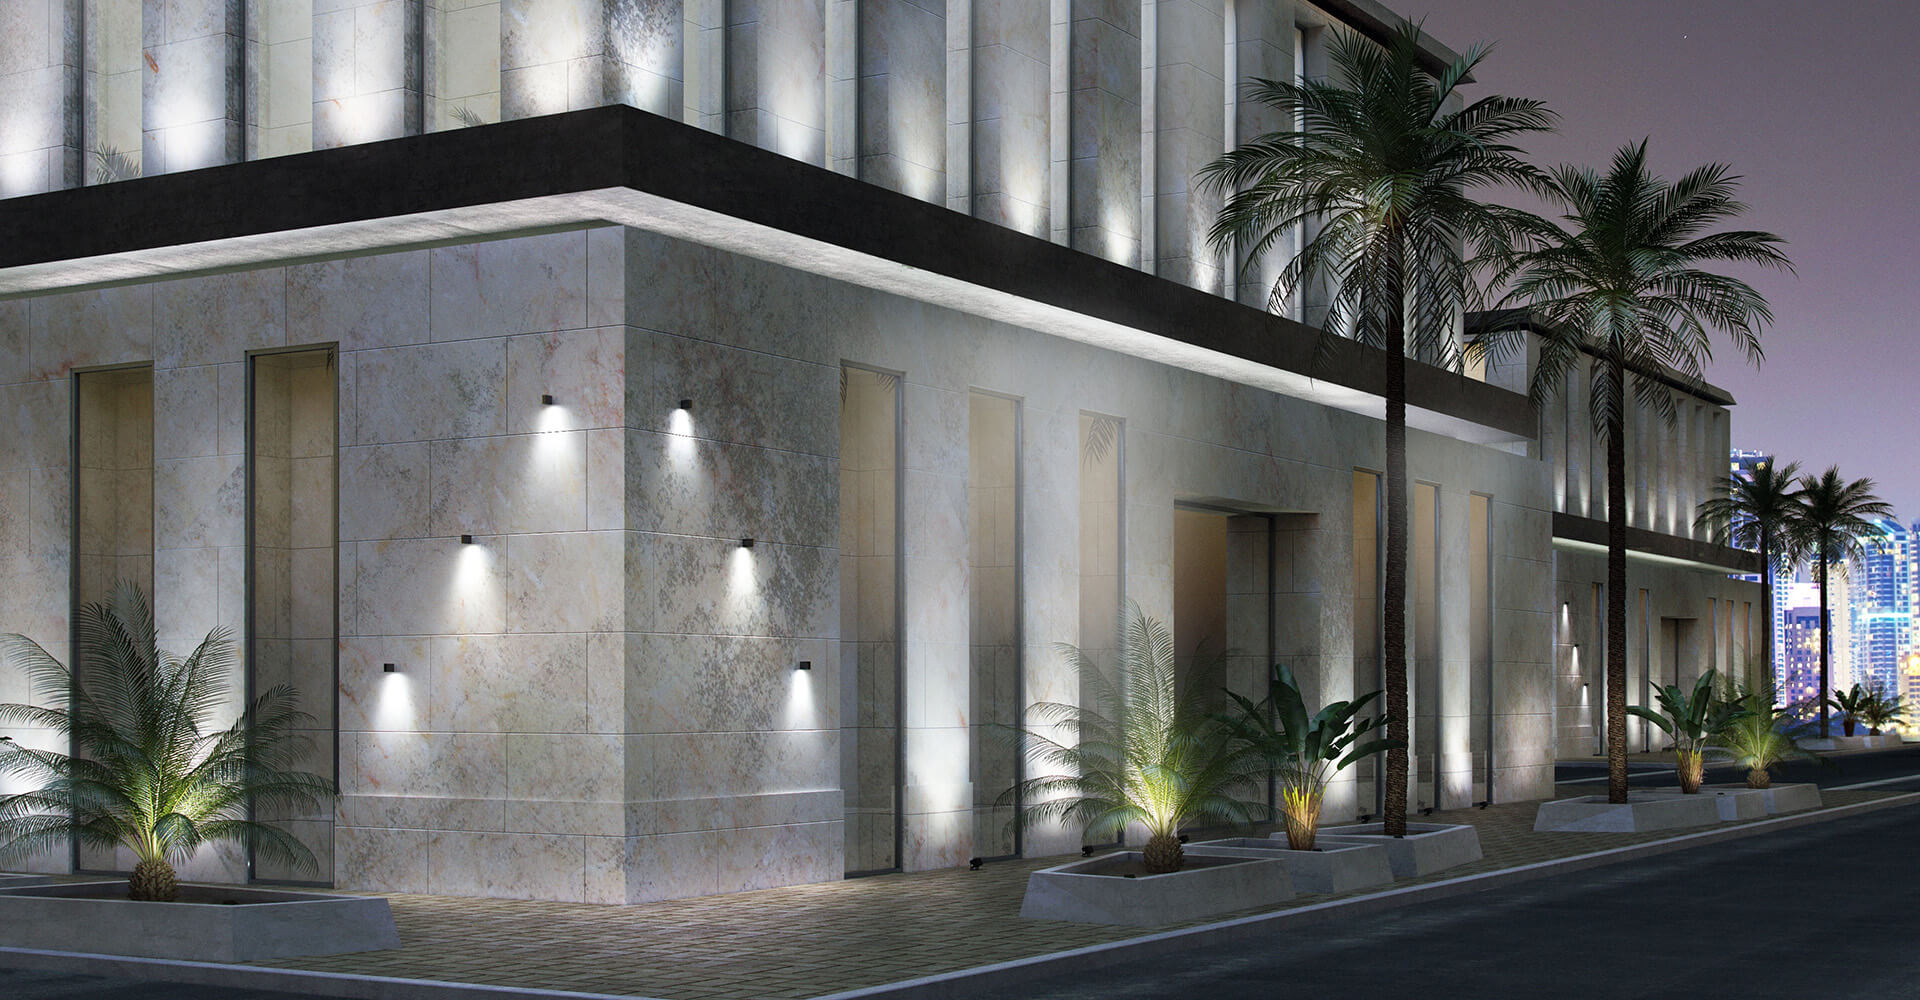 Solutions for architectural lighting